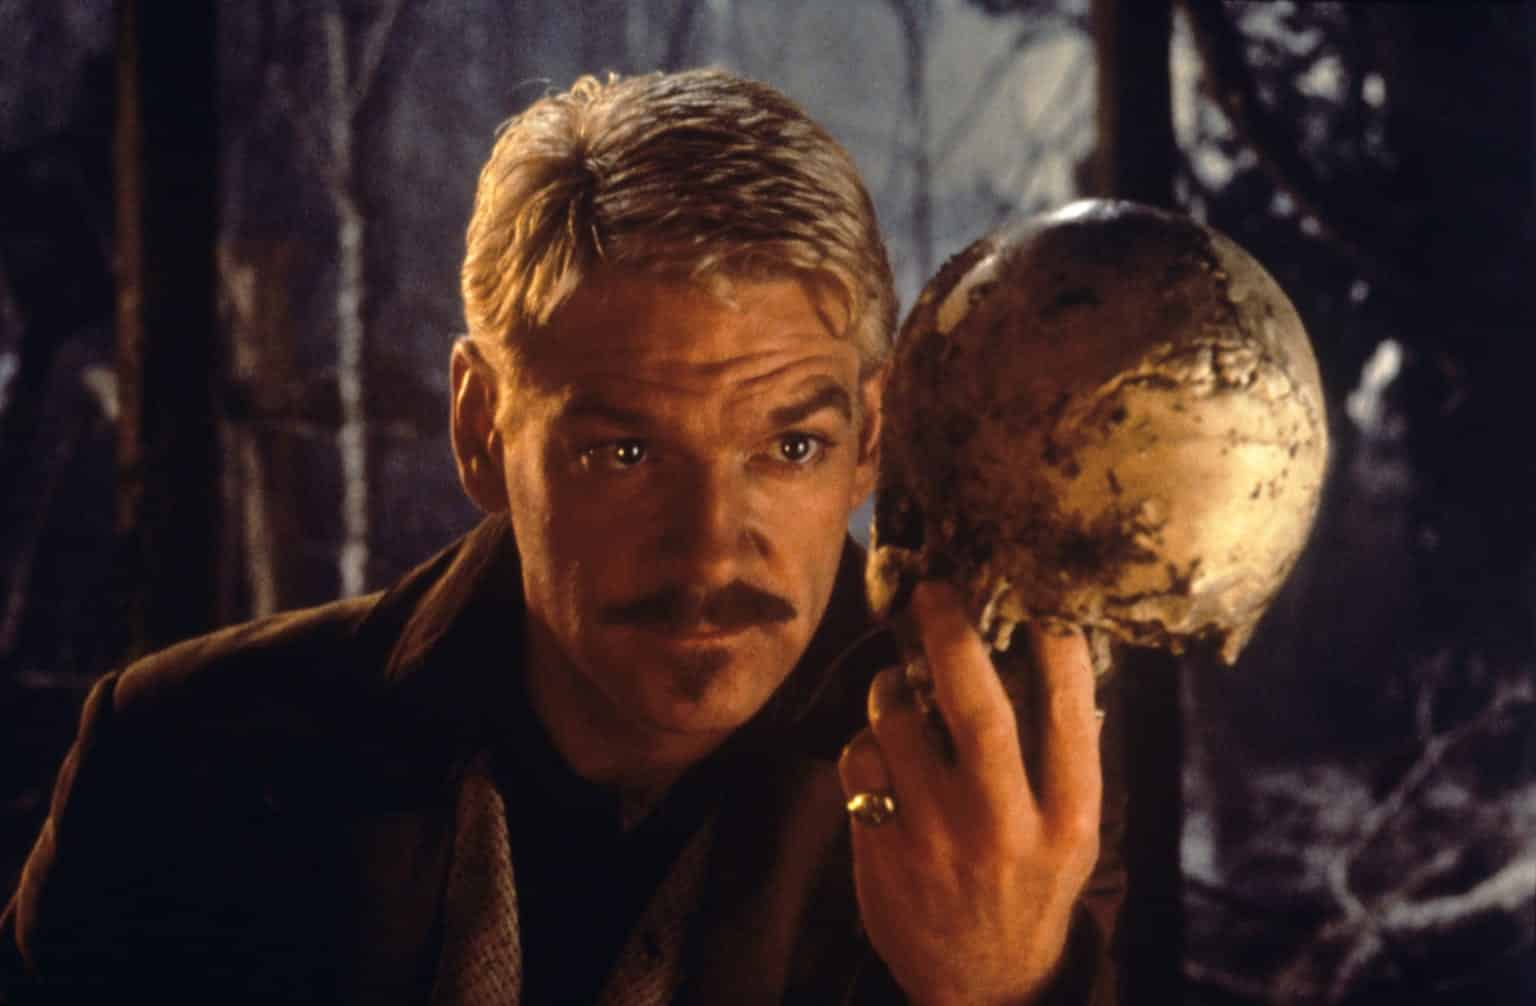 Hamlet holds up a skull in front of him